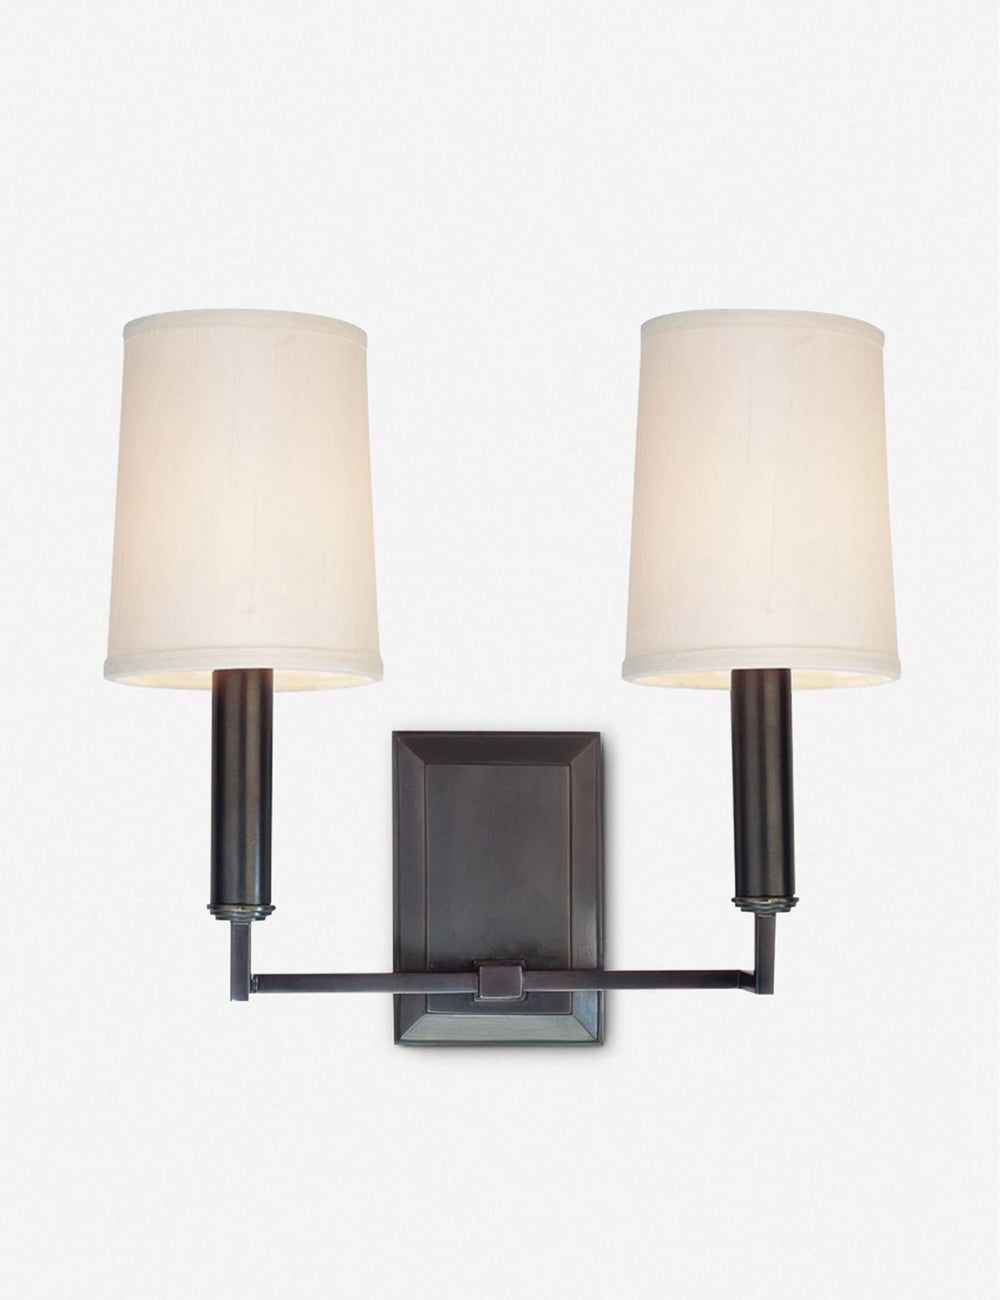 Clinton Dual-Arm Old Bronze Wall Sconce with Off-White Parchment Shades